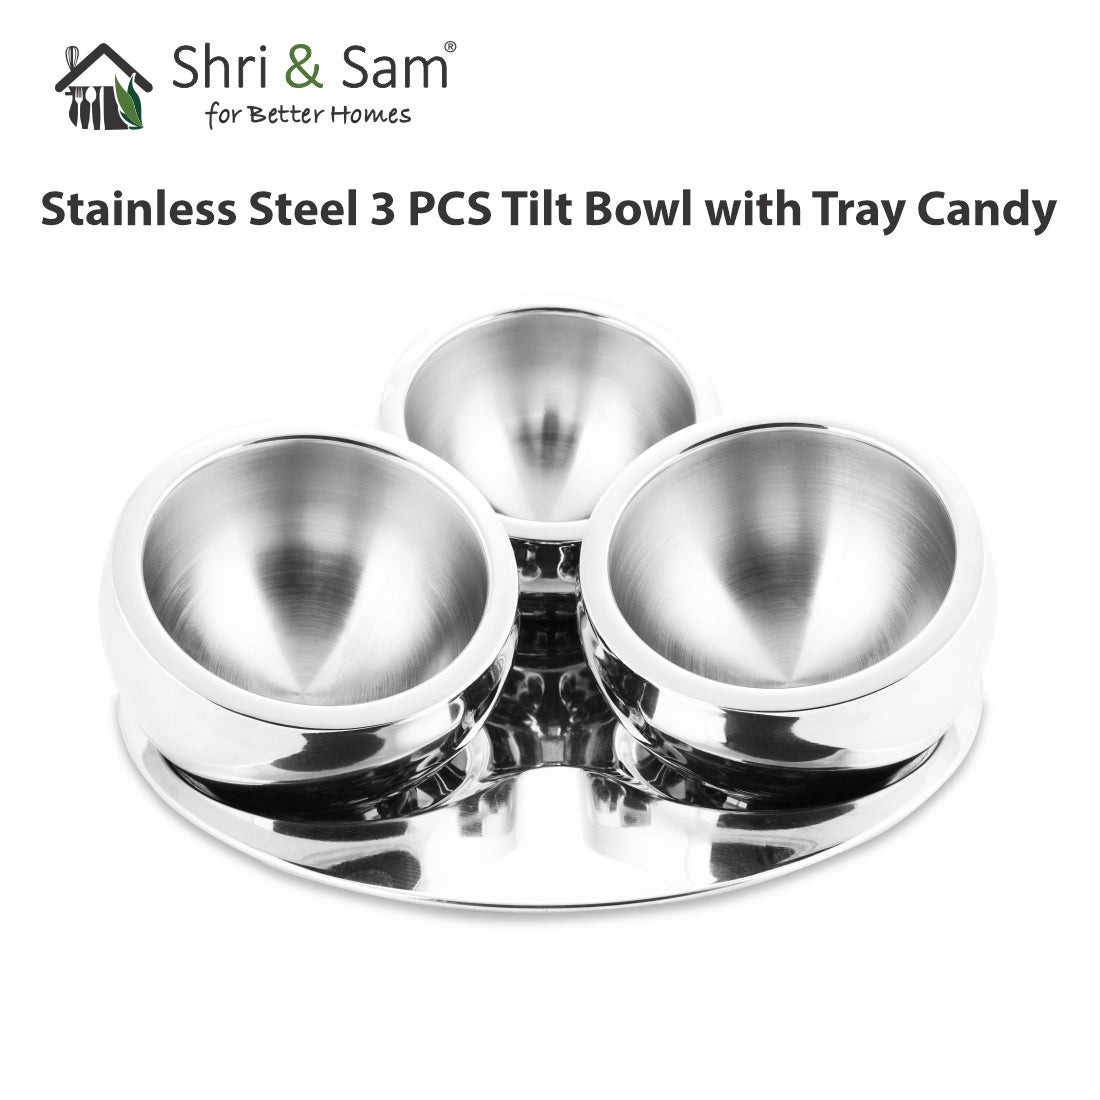 Stainless Steel 3 PCS Tilt Bowl with Tray Candy